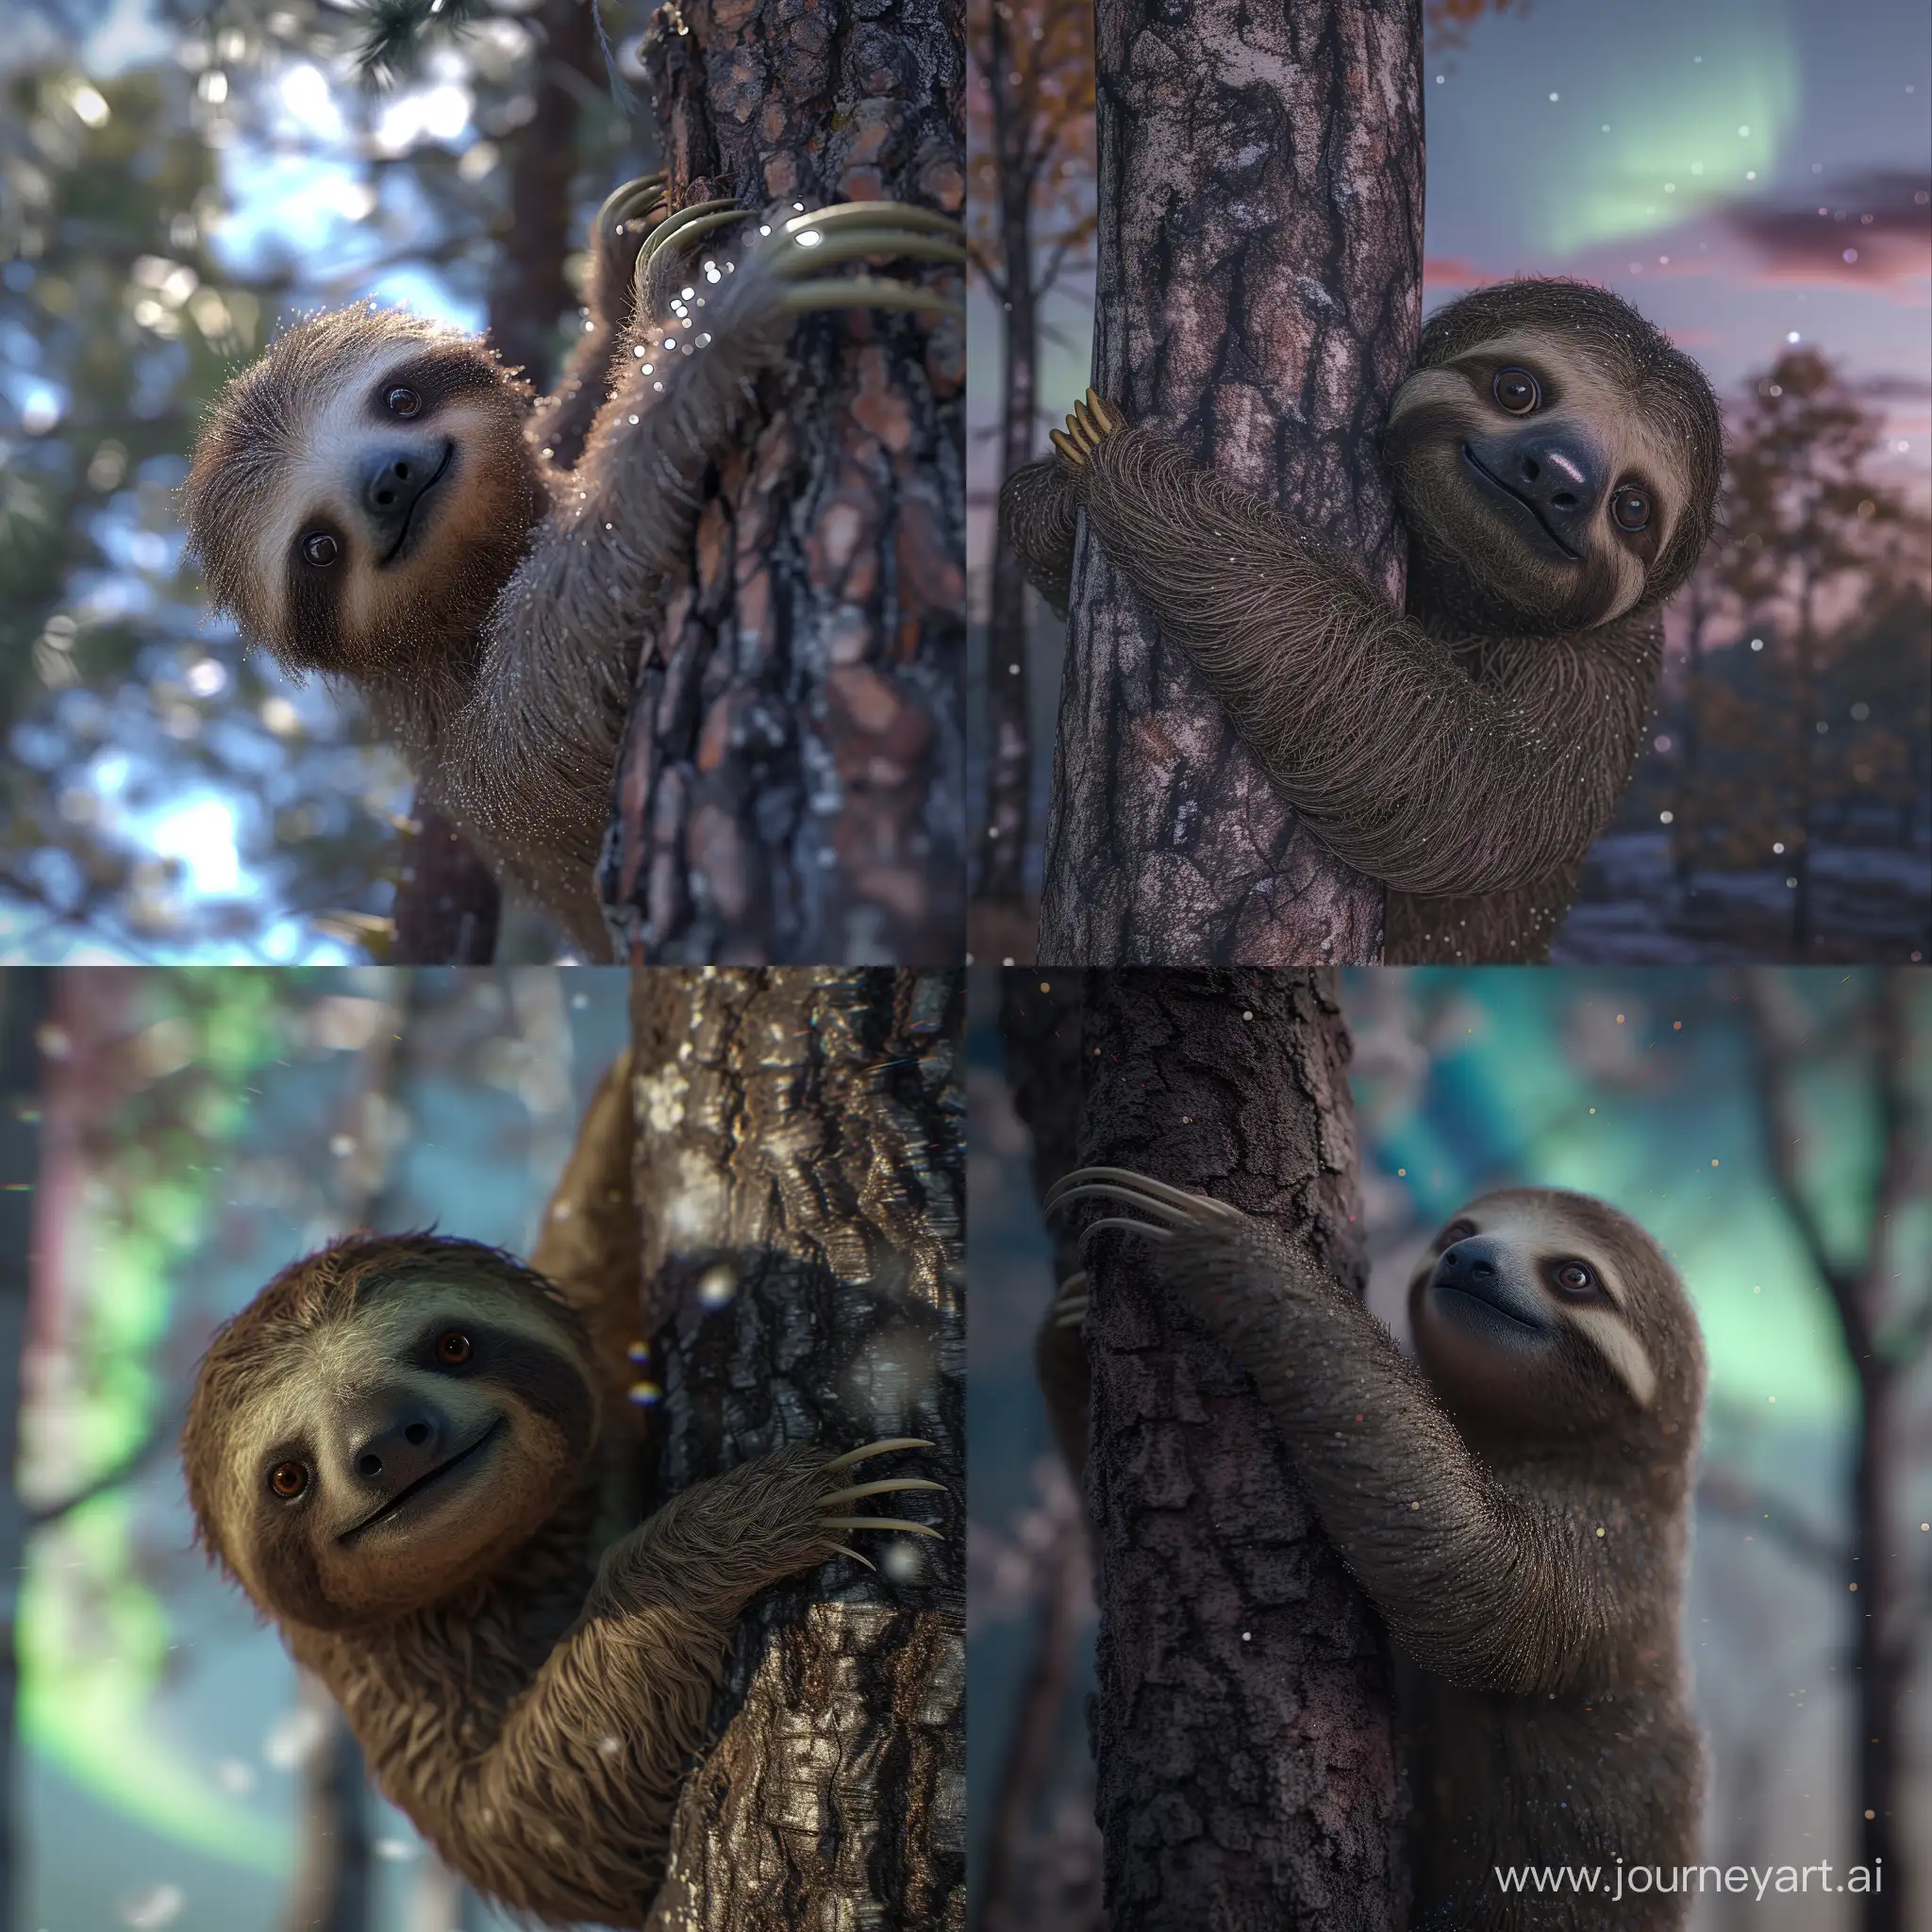 ((Big eyed realistic sloth)), hanging from a tree, <lora:duck_20230805184525:0.8>, AS-AdultV2,cowboyshot,dynamic angle,(fantasy style:1.2),(high quality:1.3),(best quality:1.3),(masterpiece:1.3),official art,official wallpaper,4k textures,(epic:1.2),(mysterious atmosphere:1.2),aurora borealis,(twilight:1.2),subtle sparkles,whimsical vibes,(detailed:1.05),(extremely detailed:1.06),sharp focus,(intricate:1.03),(extremely intricate:1.04),low contrast,soft cinematic light,soothing tones,hdr,(beautiful scenery:1.08),(detailed scenery:1.08),(intricate scenery:1.07),(wonderful scenery:1.05),(beautiful face:1.1),[perfect eyes:0.8],[perfect skin:0.8],[detailed face:0.8],[detailed eyes:0.8],[detailed hair:0.9],[detailed lips:0.8]